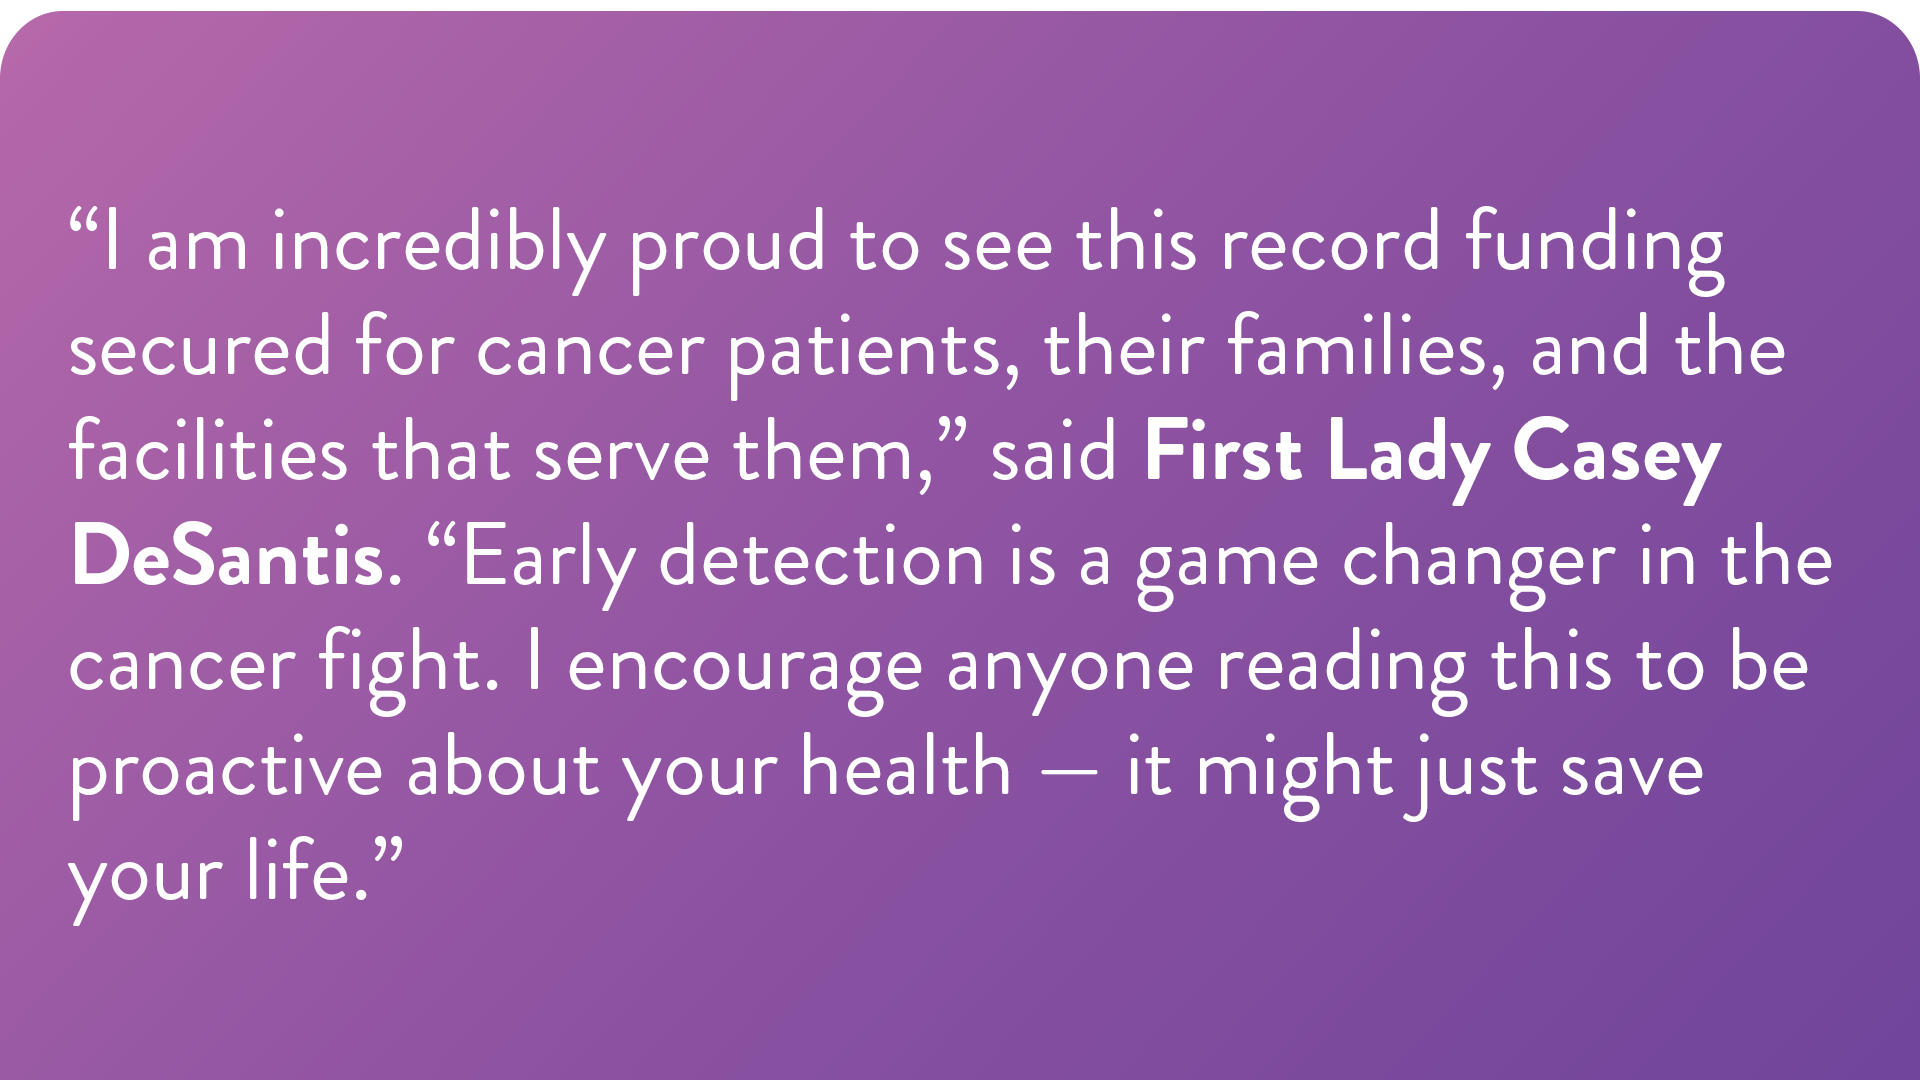 “I am incredibly proud to see this record funding secured for cancer patients, their families, and the facilities that serve them,” said First Lady Casey DeSantis. “Early detection is a game changer in the cancer fight. I encourage anyone reading this to be proactive about your health — it might just save your life.”